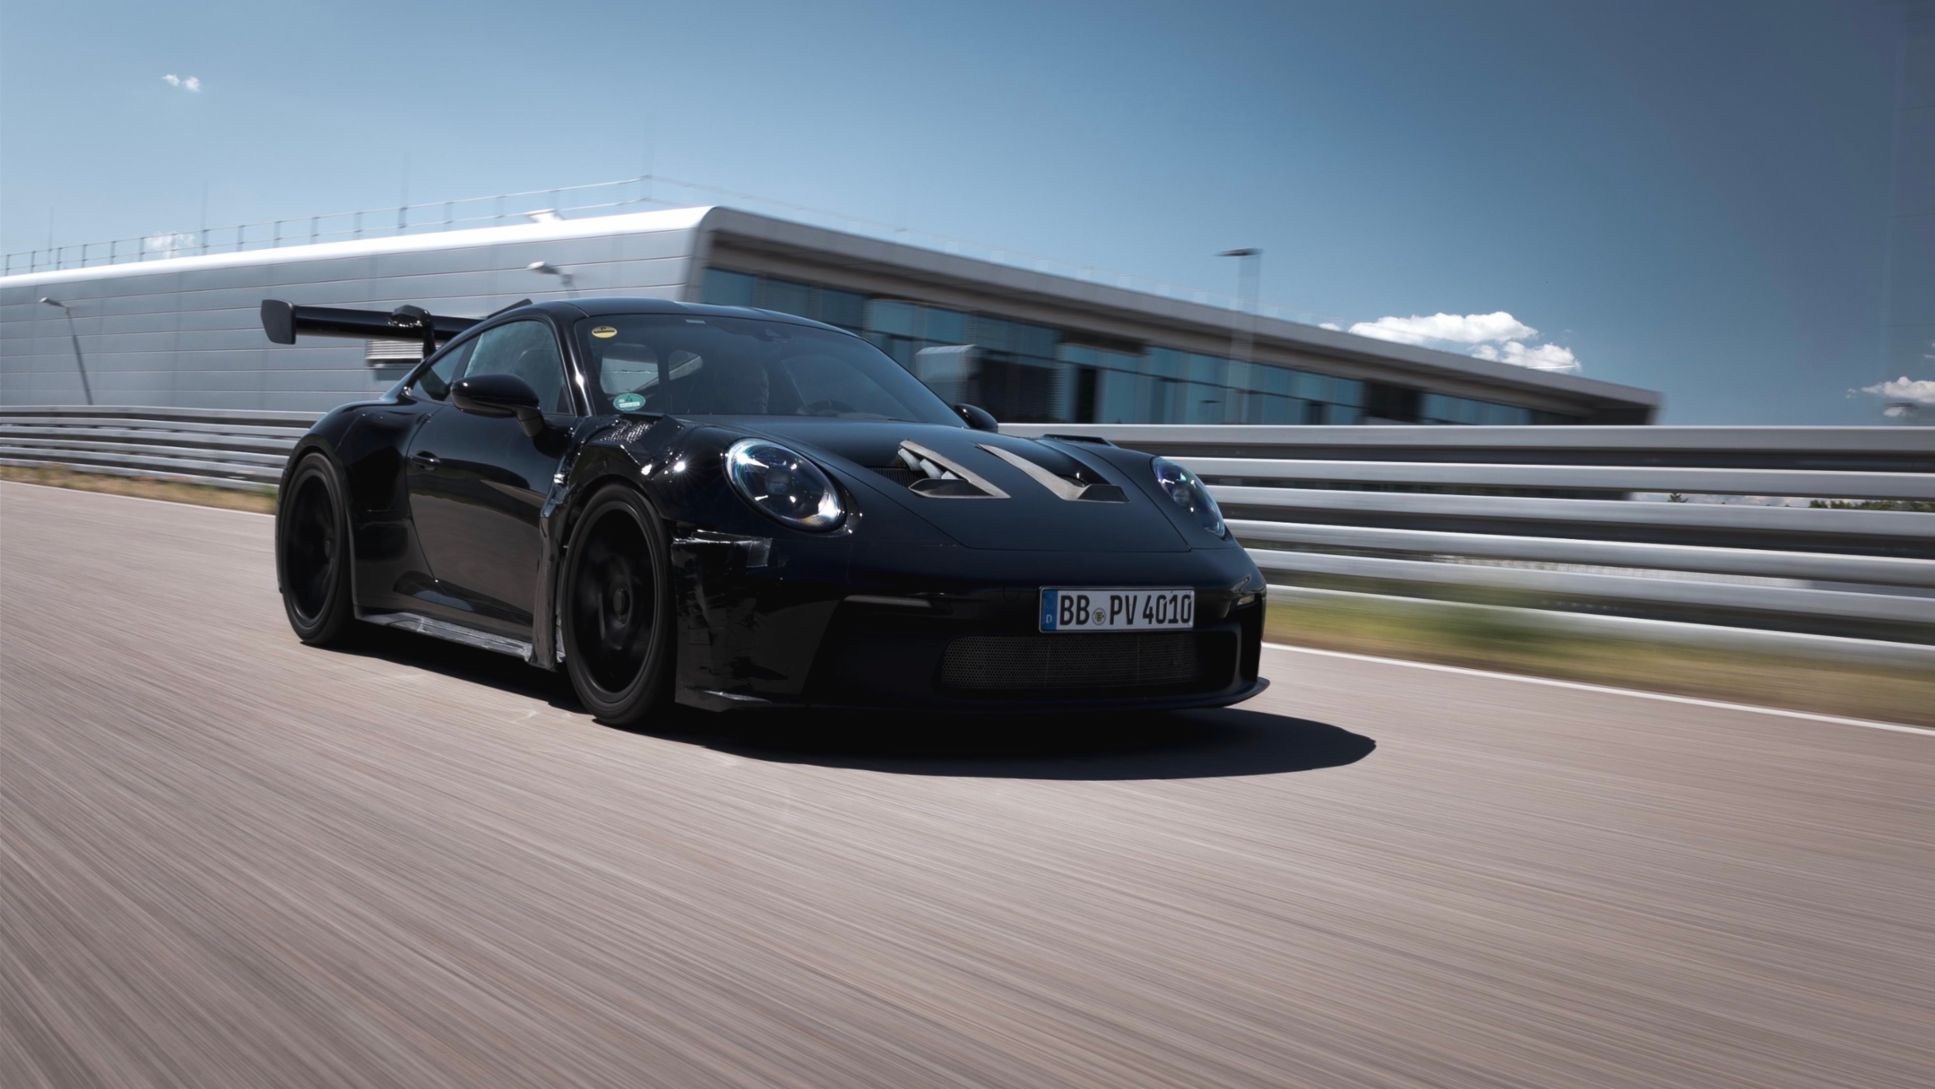 Porsche shows off production-ready 911 GT3 RS mule ahead of August 17th unveiling